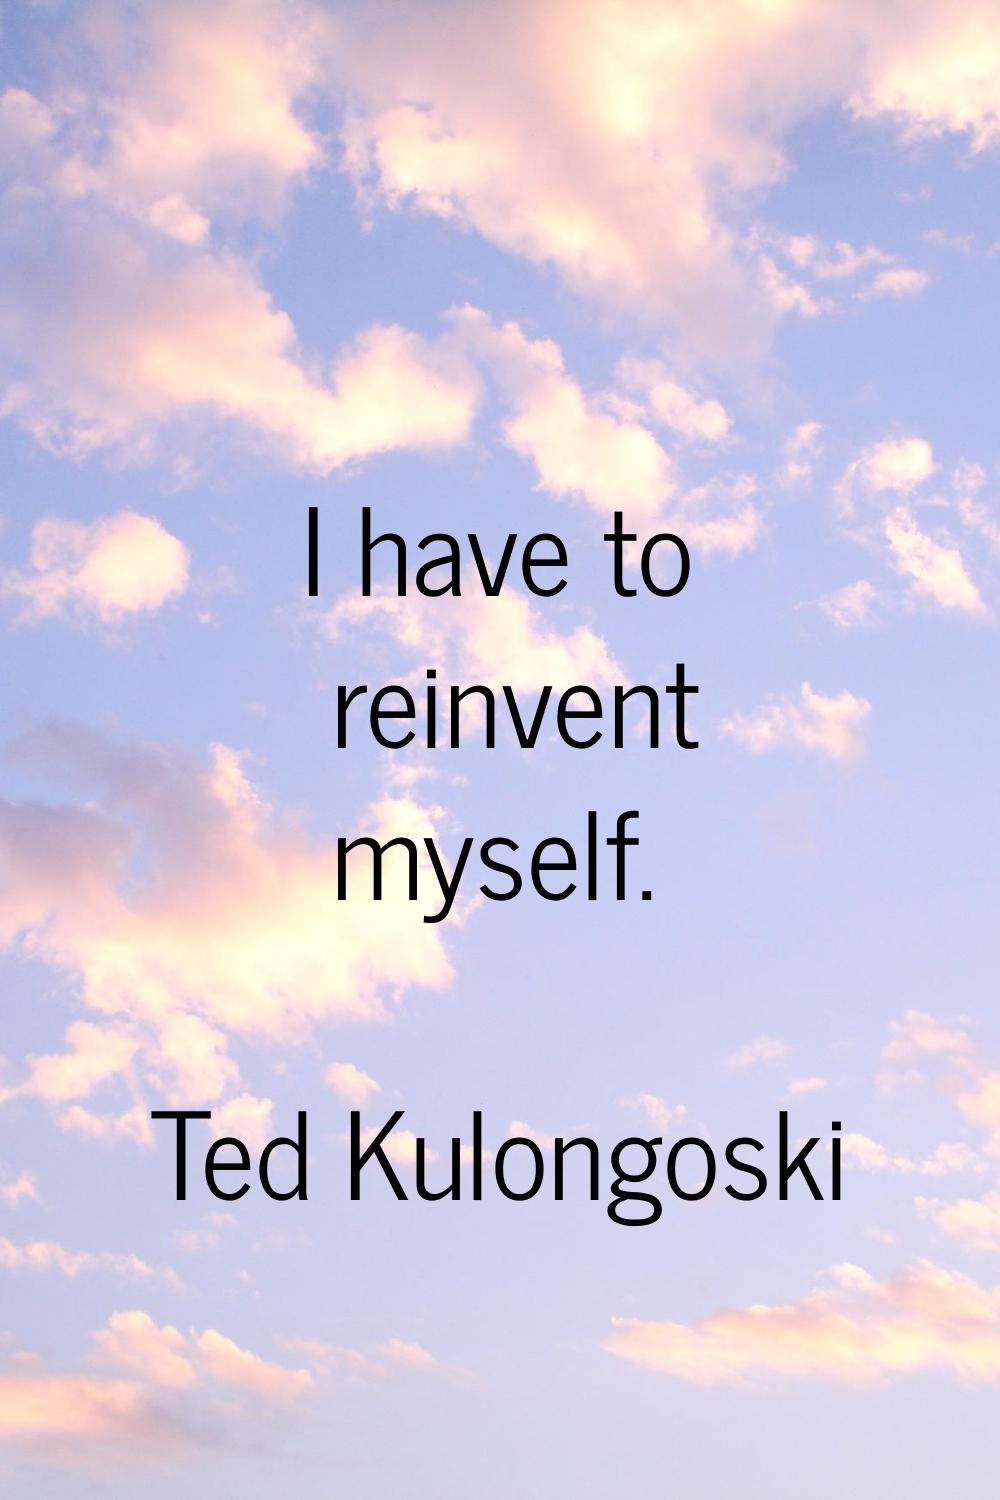 I have to reinvent myself.